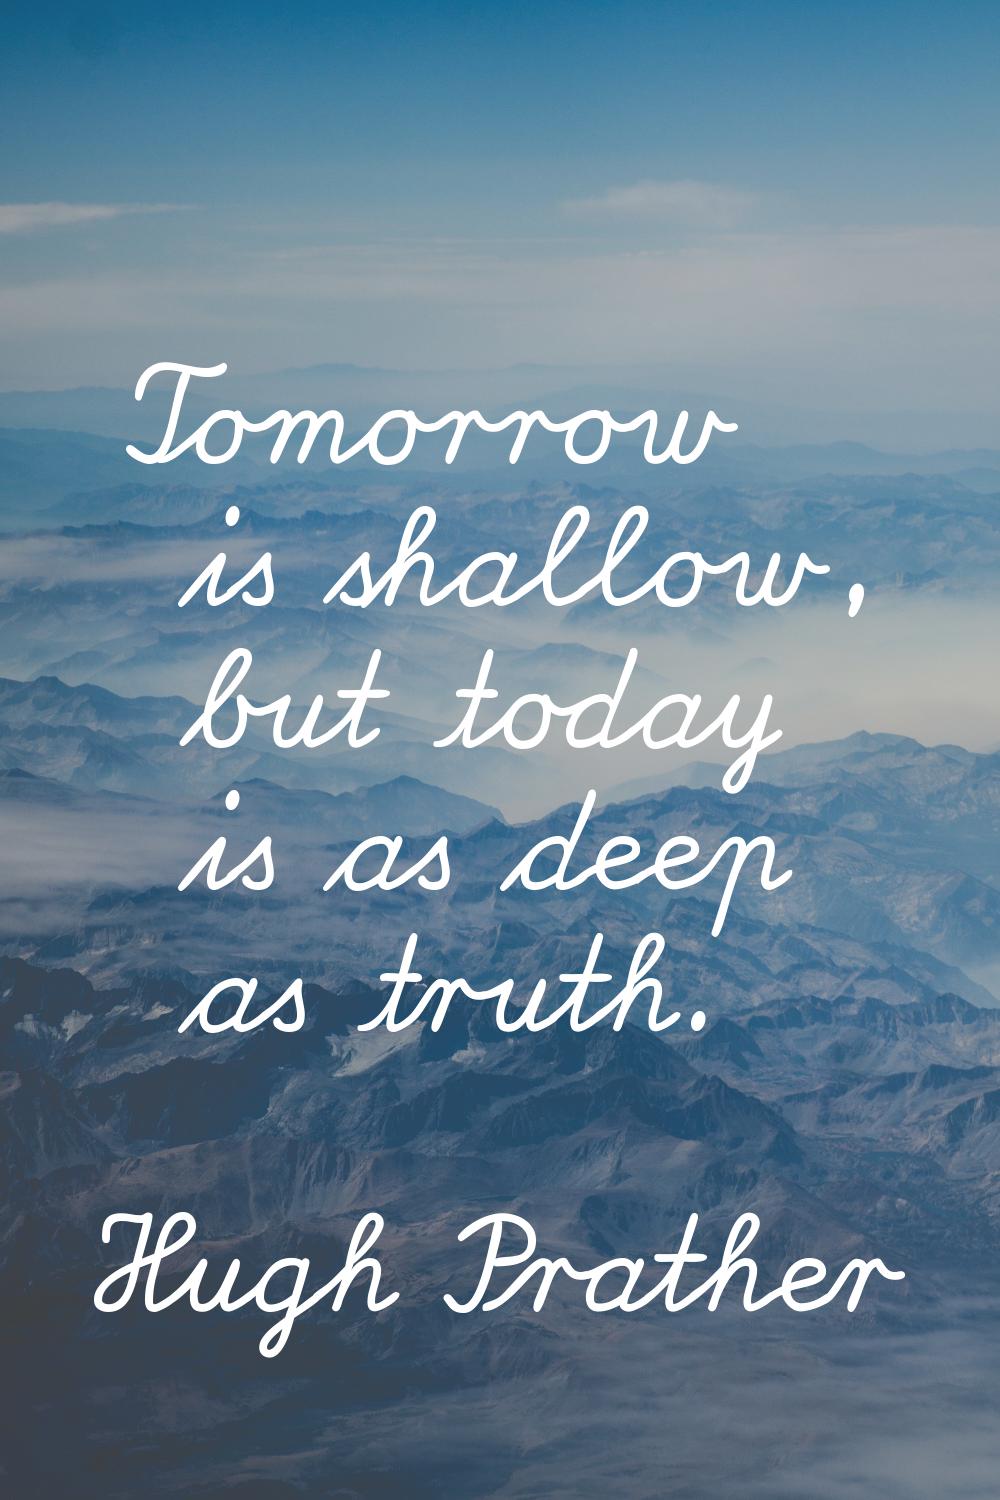 Tomorrow is shallow, but today is as deep as truth.